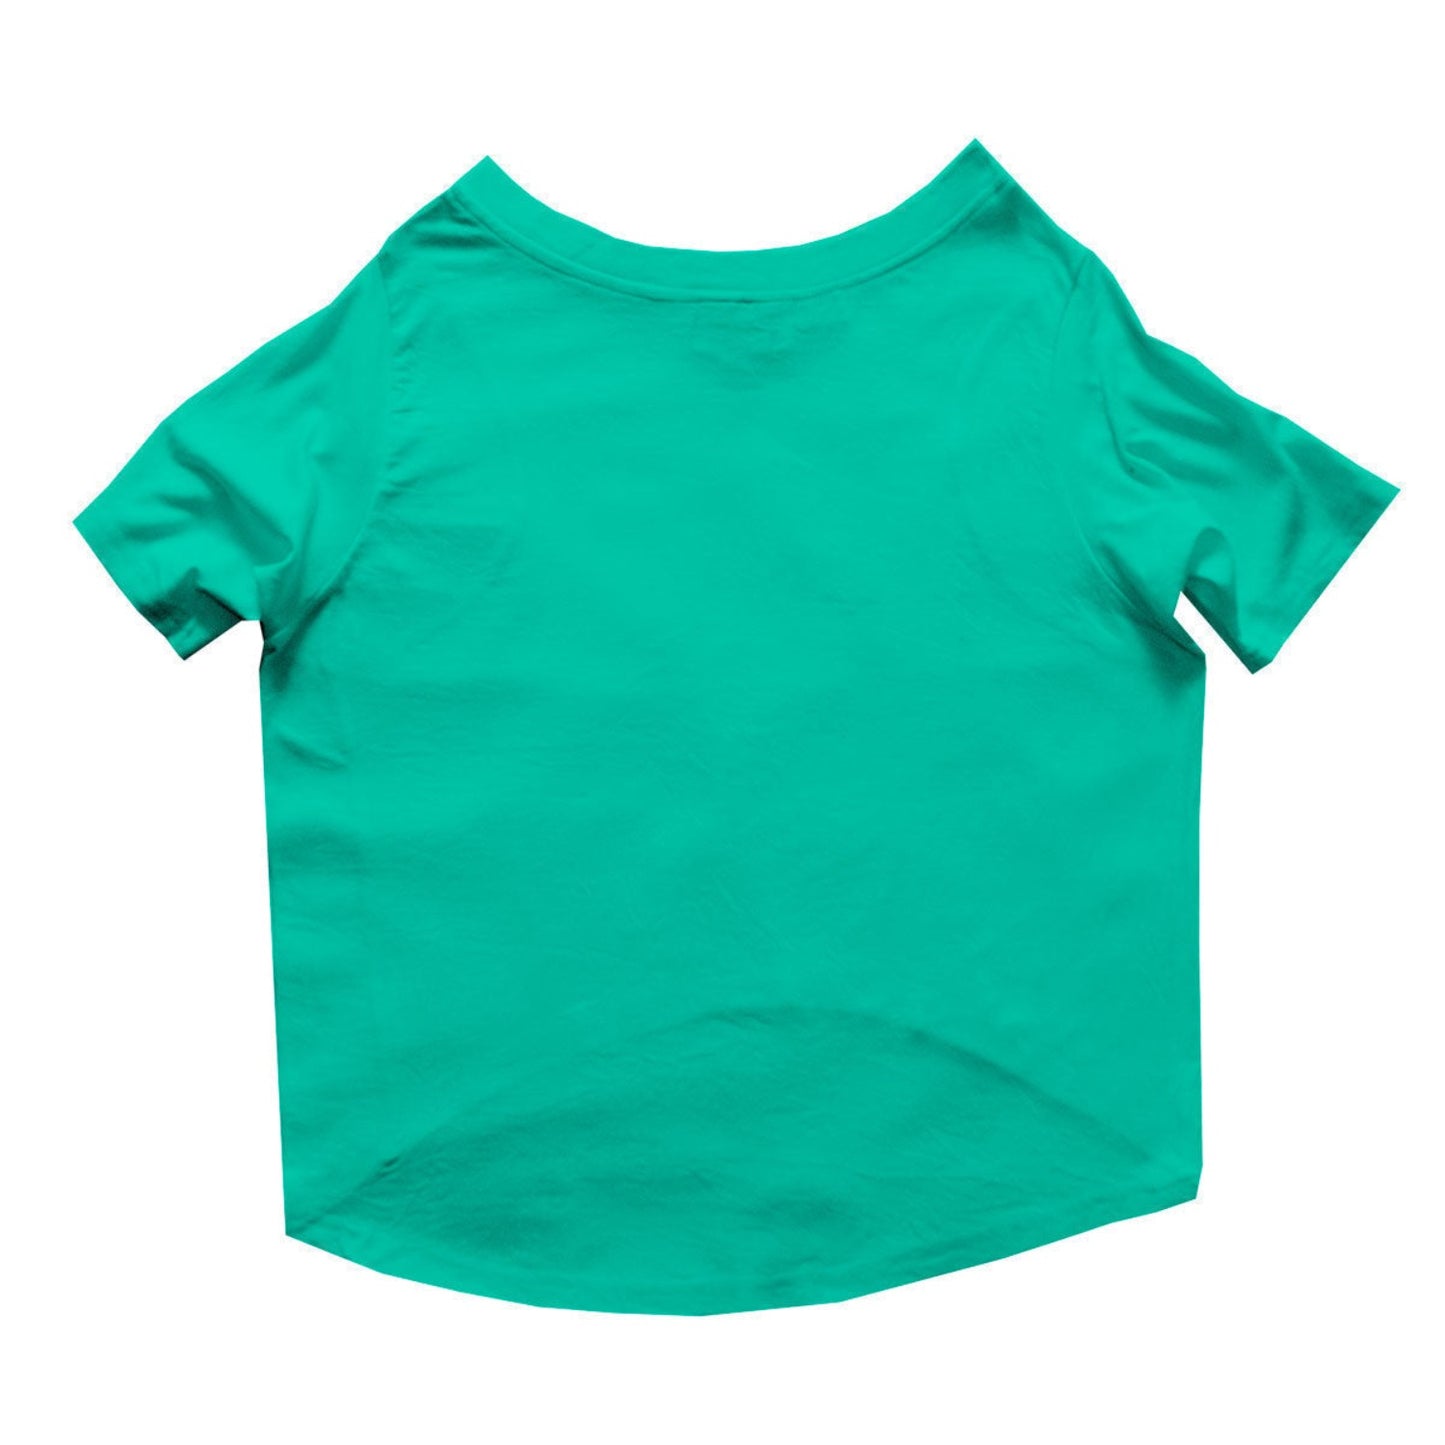 Ruse / i-just-want-to-hang-with-my-human-crew-neck-dog-tee / Aqua Green